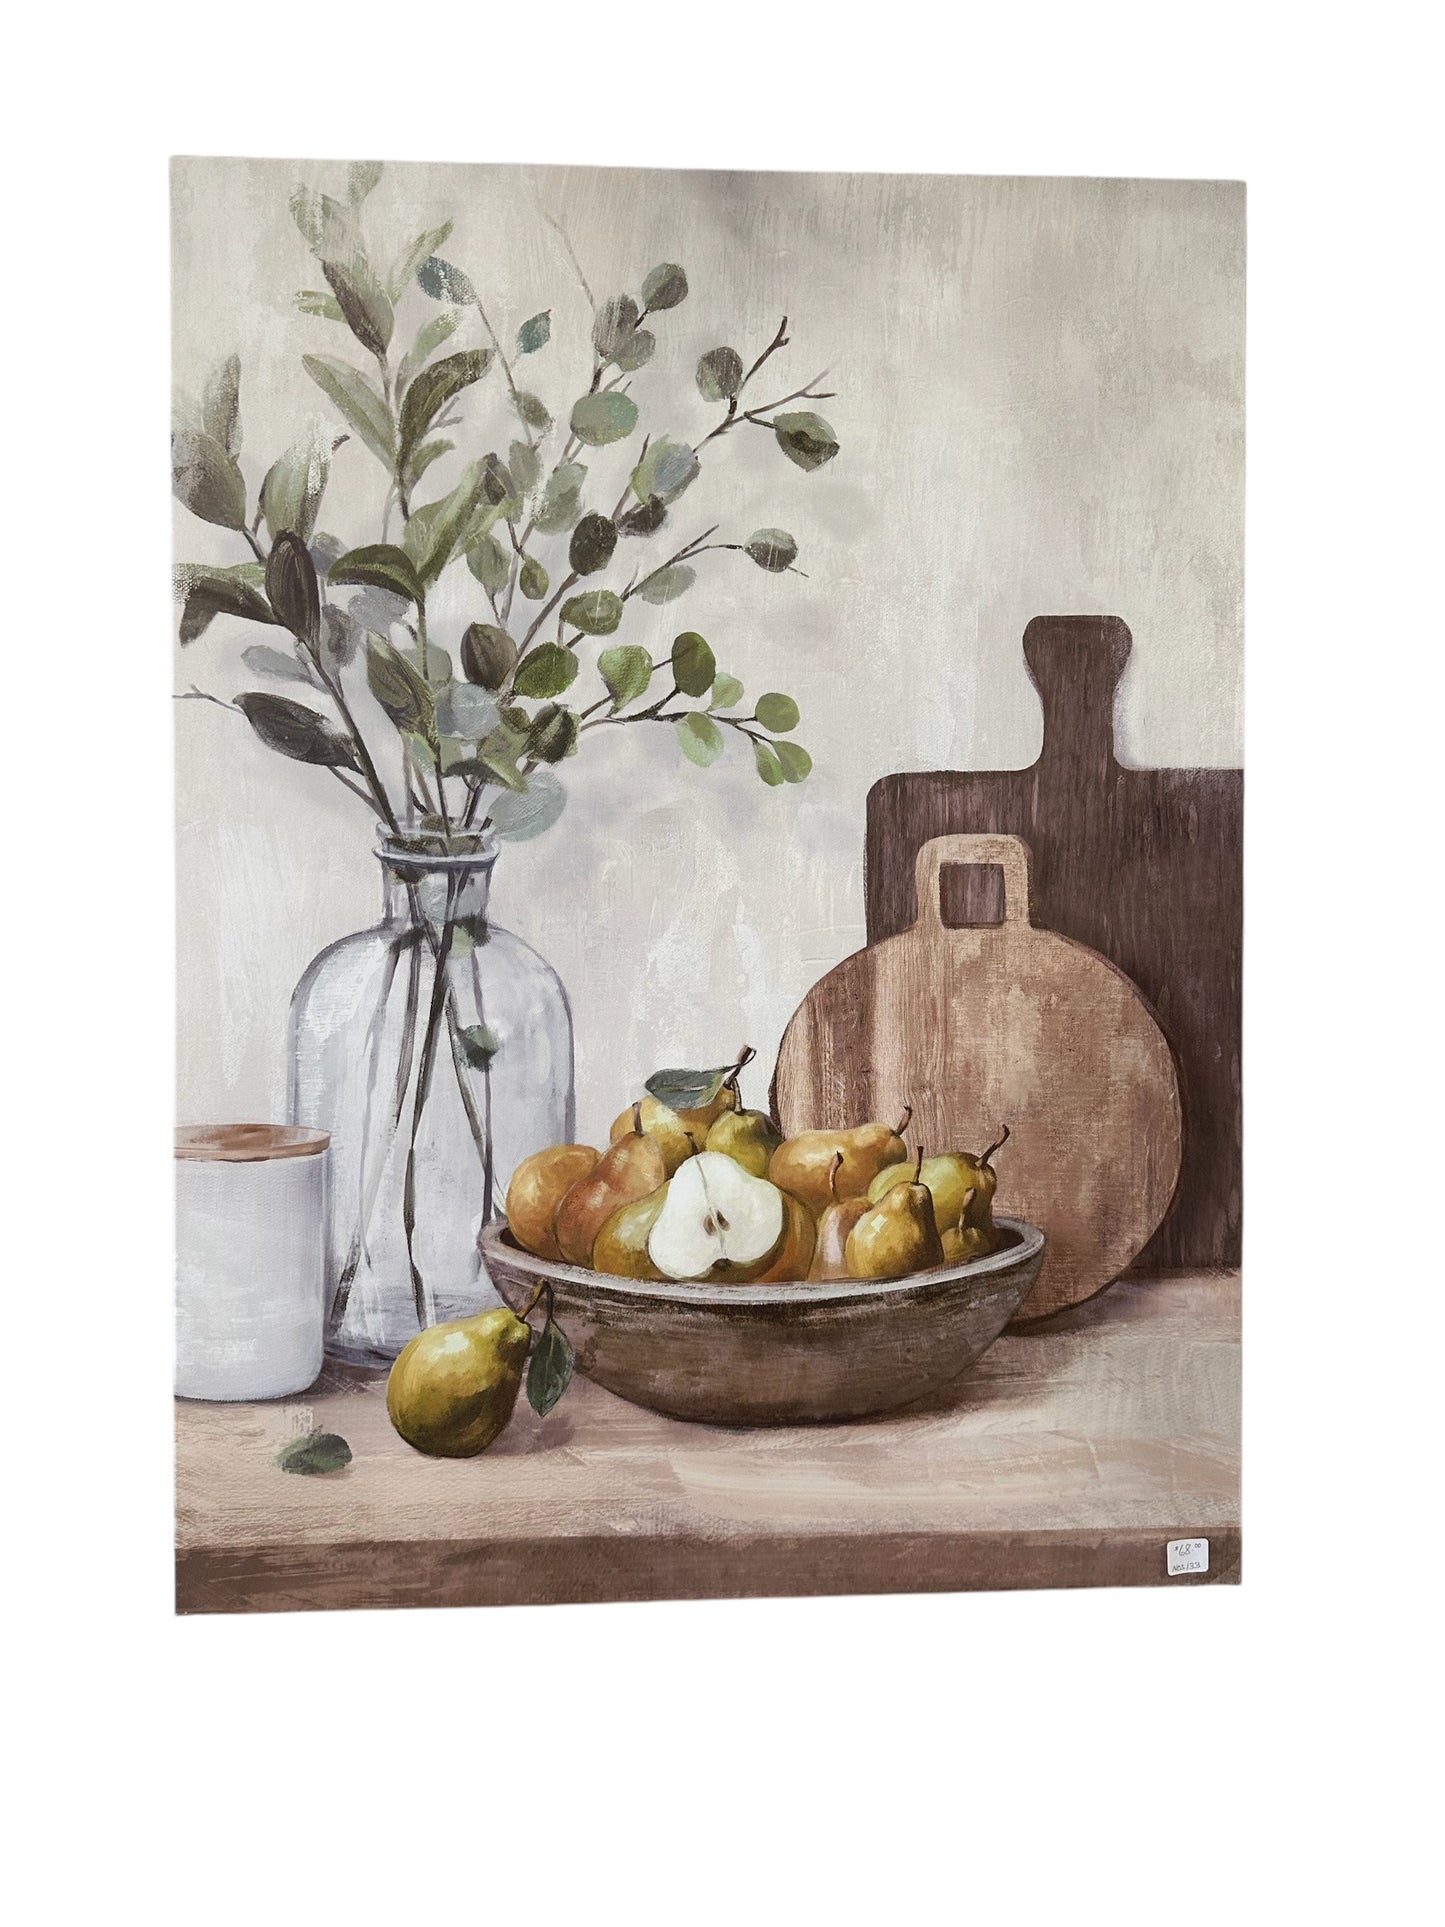 Wall Hanging- Bowl of Pears w/cutting boards (NOS133)